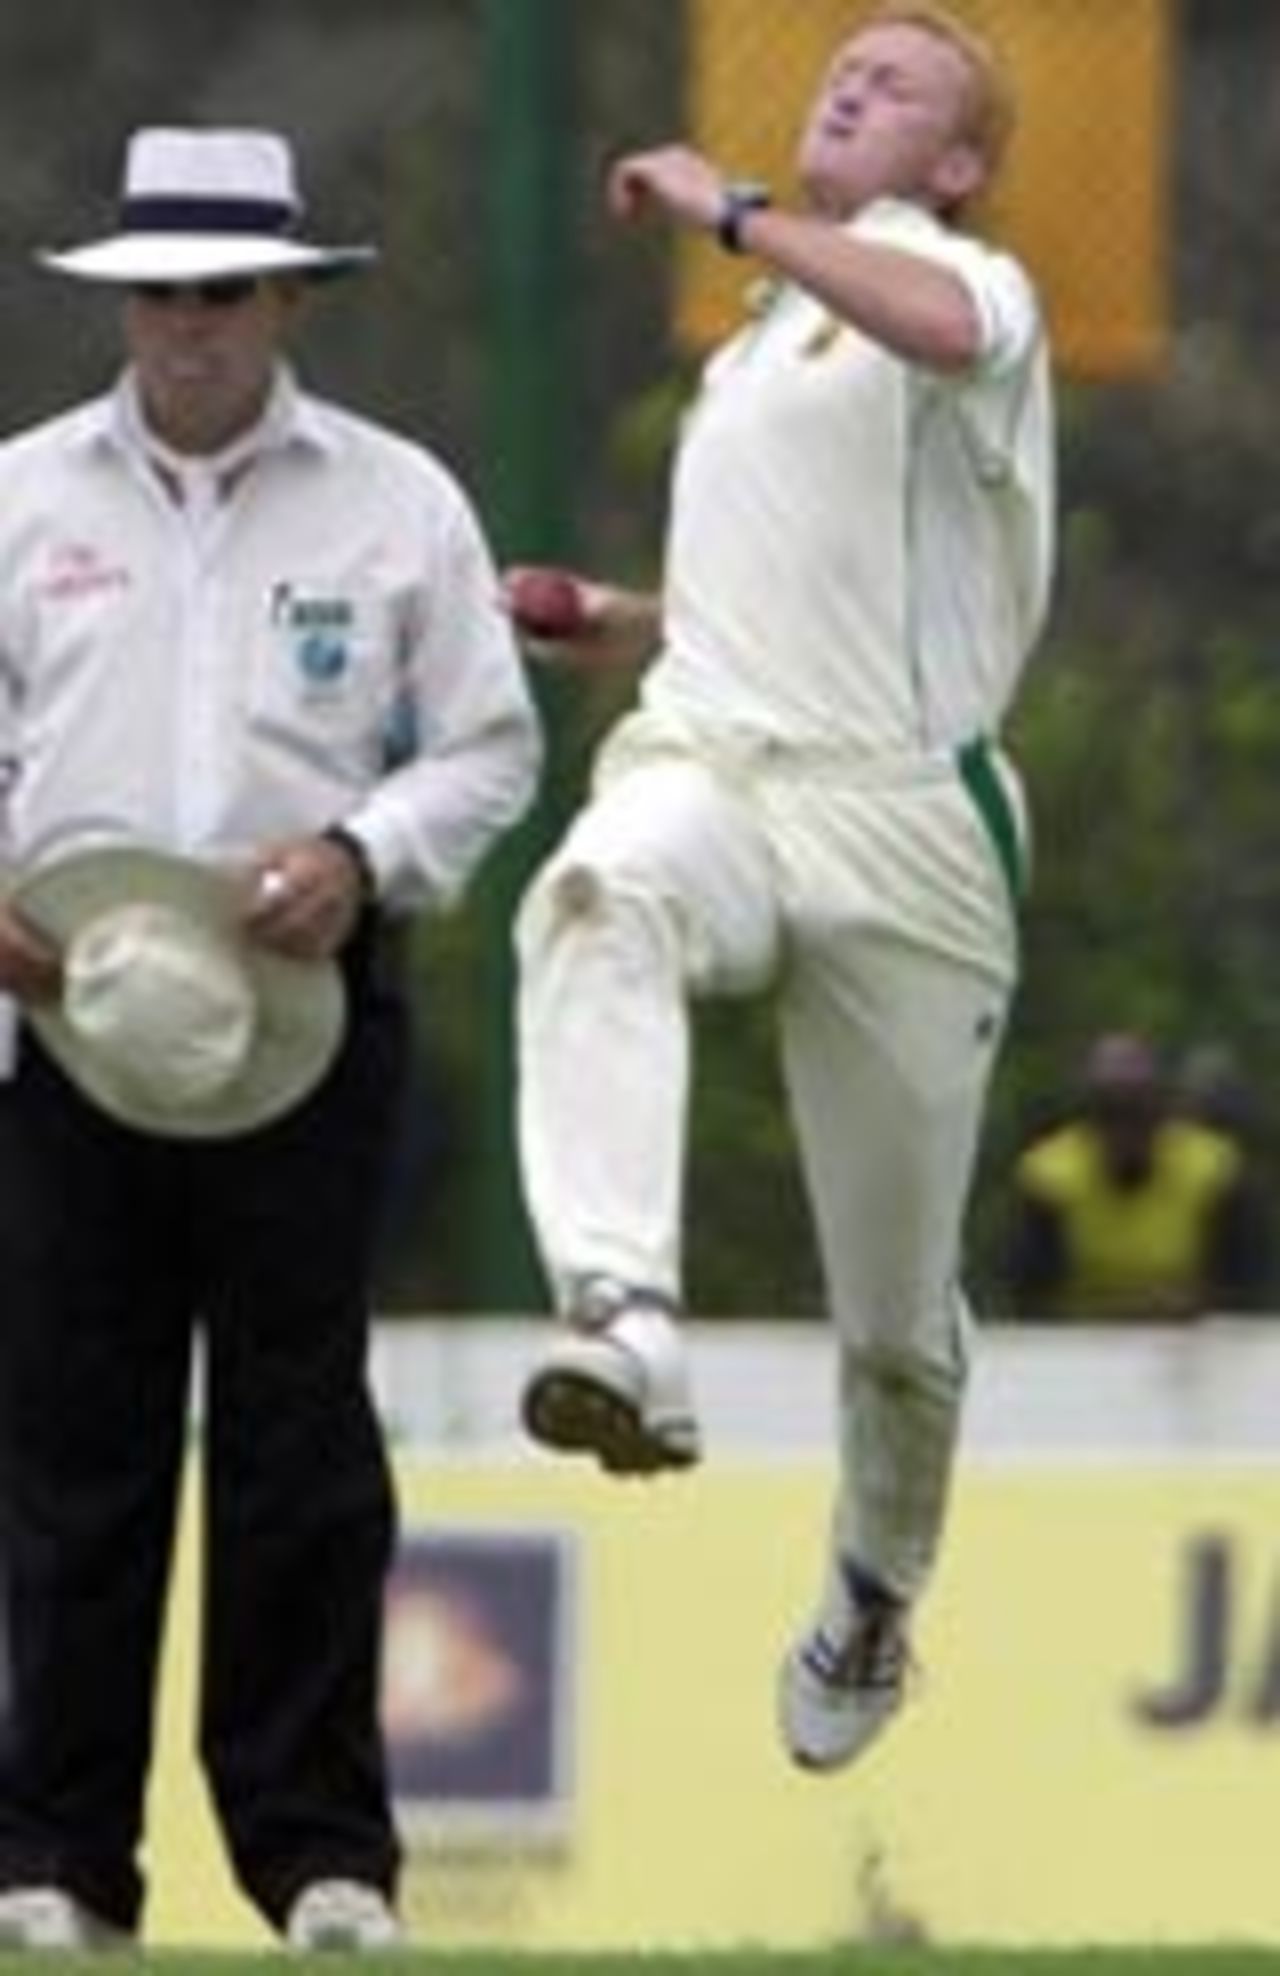 Nantie Hayward leaps in his delivery stride, Sri Lanka v South Africa, 1st Test, Galle, 1st day, August 4, 2004